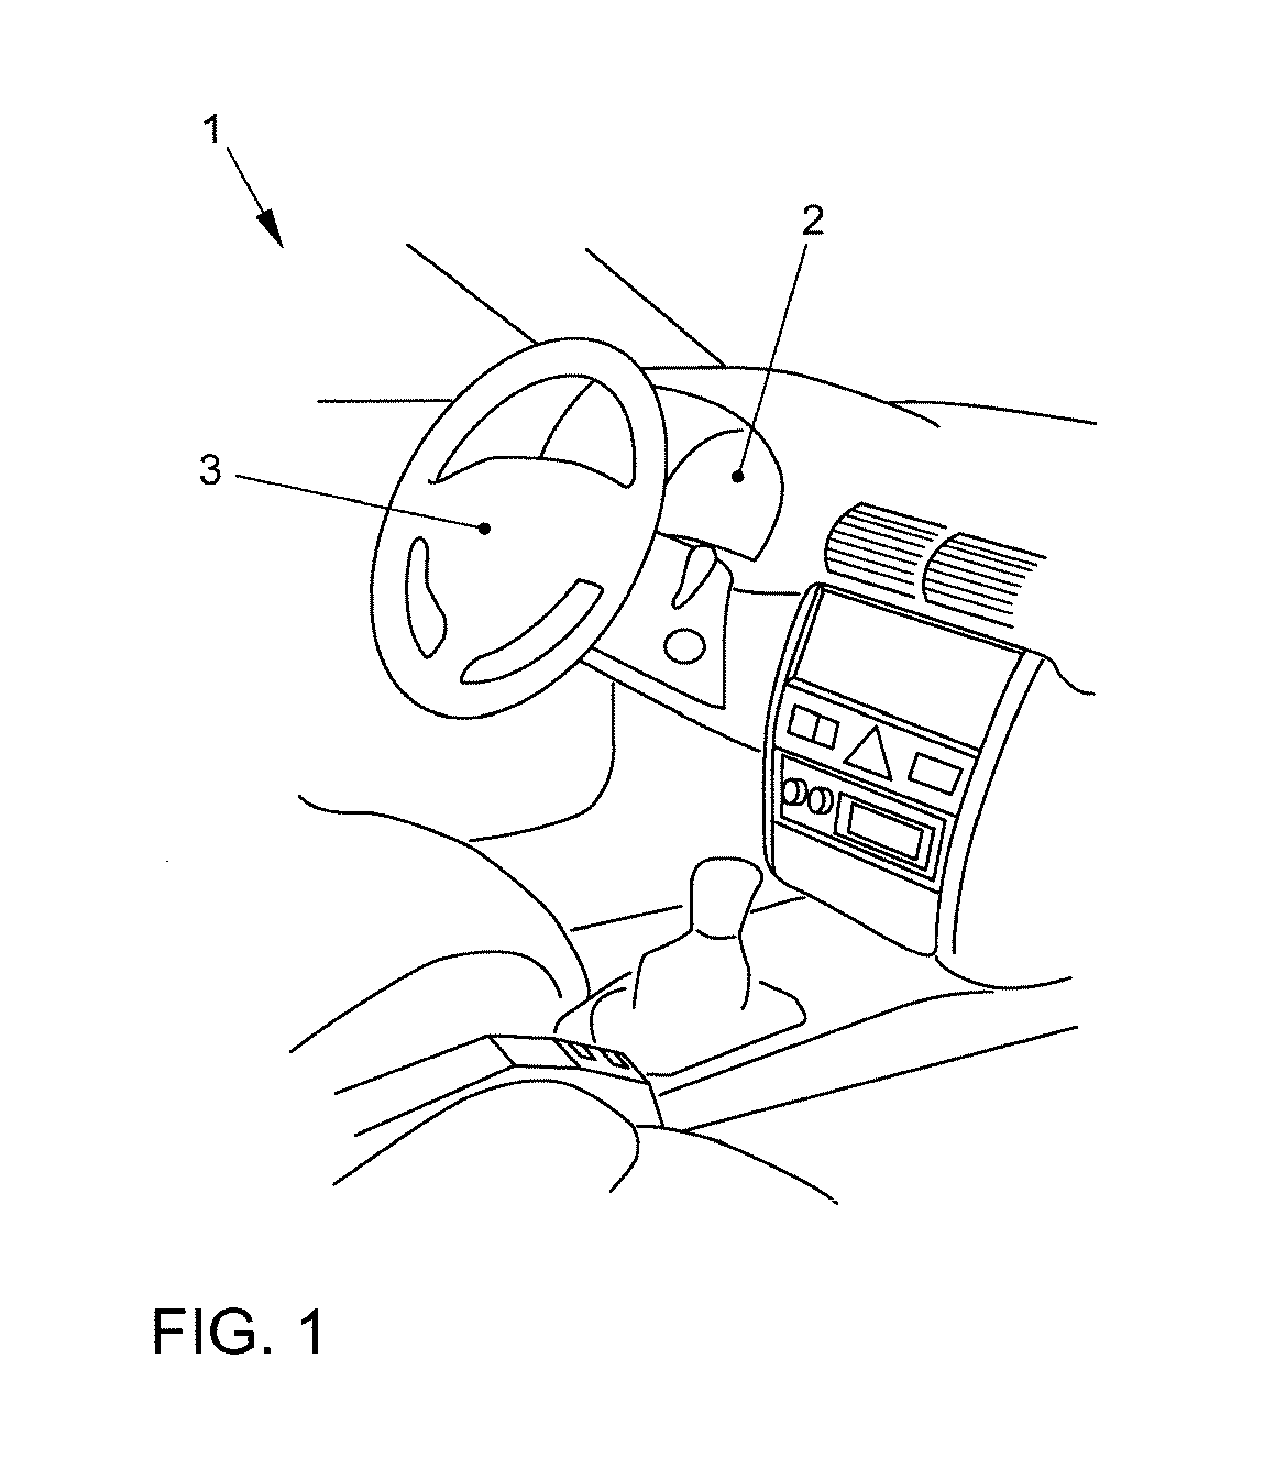 Display device for a vehicle for displaying information relating to the operation of the vehicle and method for displaying this information